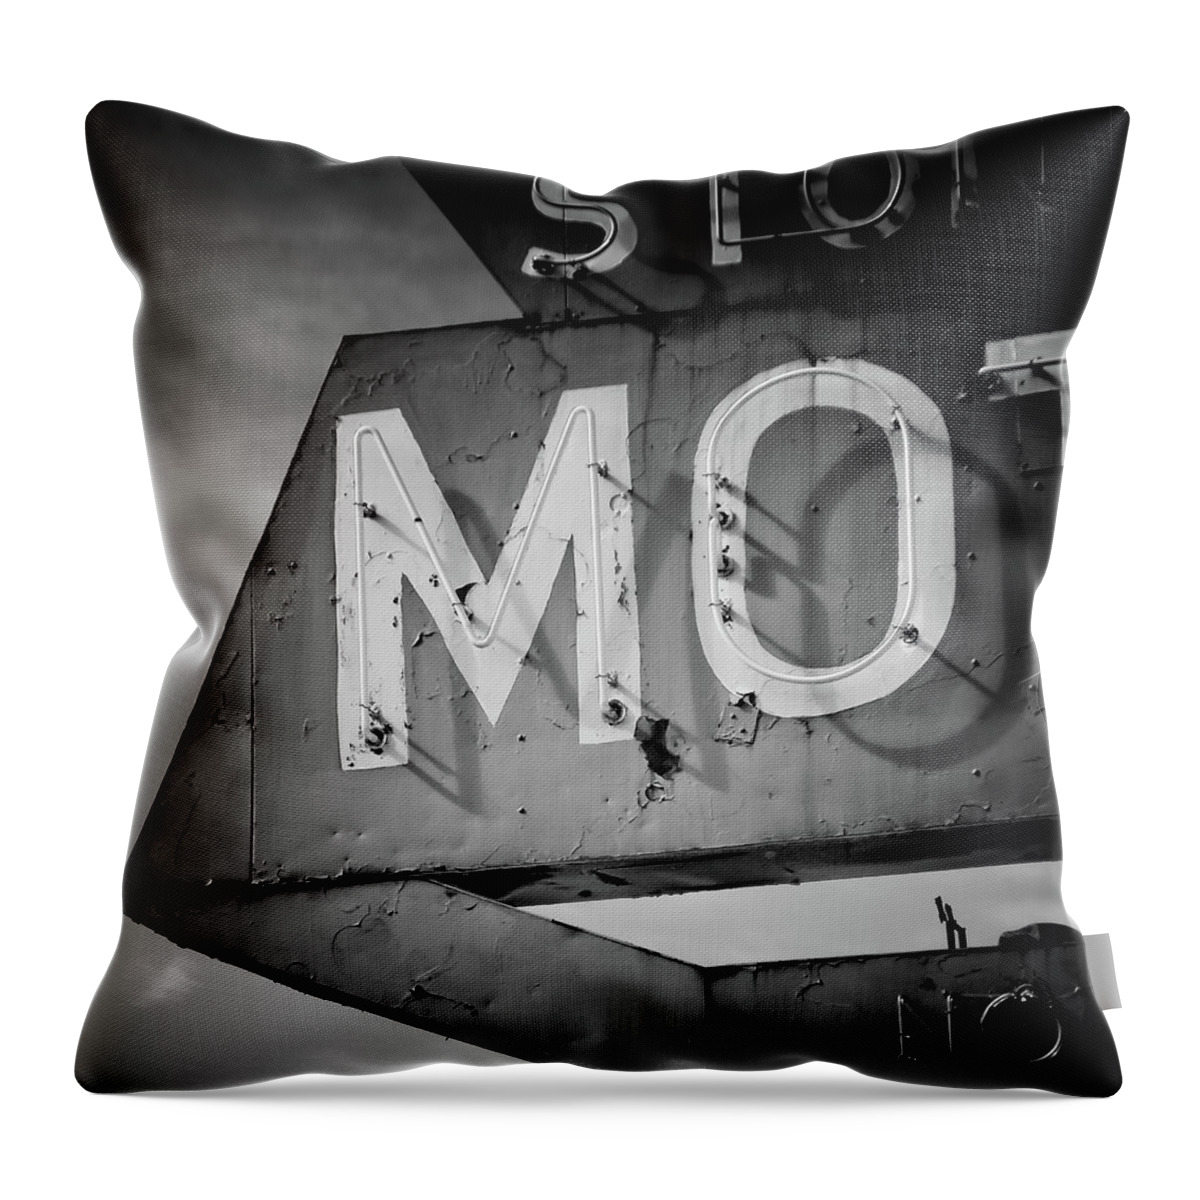 Old Throw Pillow featuring the photograph 4 Rooms Squared by John De Bord